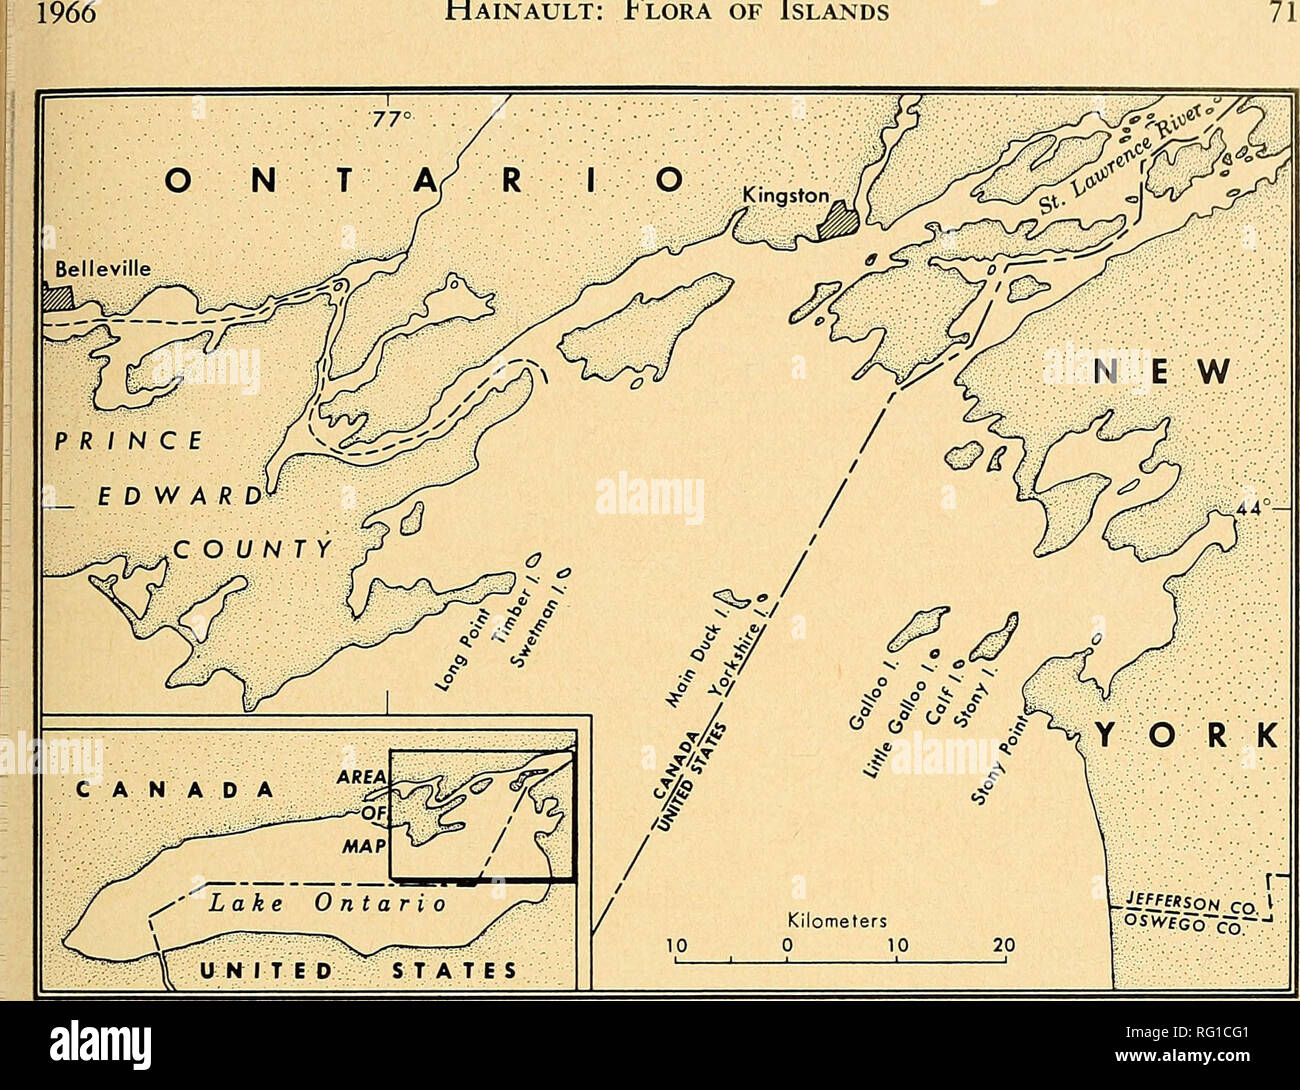 . The Canadian field-naturalist. Hainault: Flora of Islands. Figure 1. The island chain of eastern Lake Ontario. perennials, essentially the same at all places. I will mention a few: Eleocharis compressa, Ratmnculns fascicularis, Myosotis verna, hanthiis brachiatiis, Scutel- laria parvula, Satureja acmos, Hedeoma hispida, and Trioda?iis perfoliata. Southern Extensions of Boreal Species Certain widespread plants in the Canadian North become rare in southern Ontario; thus, a small forest of spruce and fir, Picea glauca and Abies balsa?mfera on Galloo Island is unusual in that it is surrounded by Stock Photo